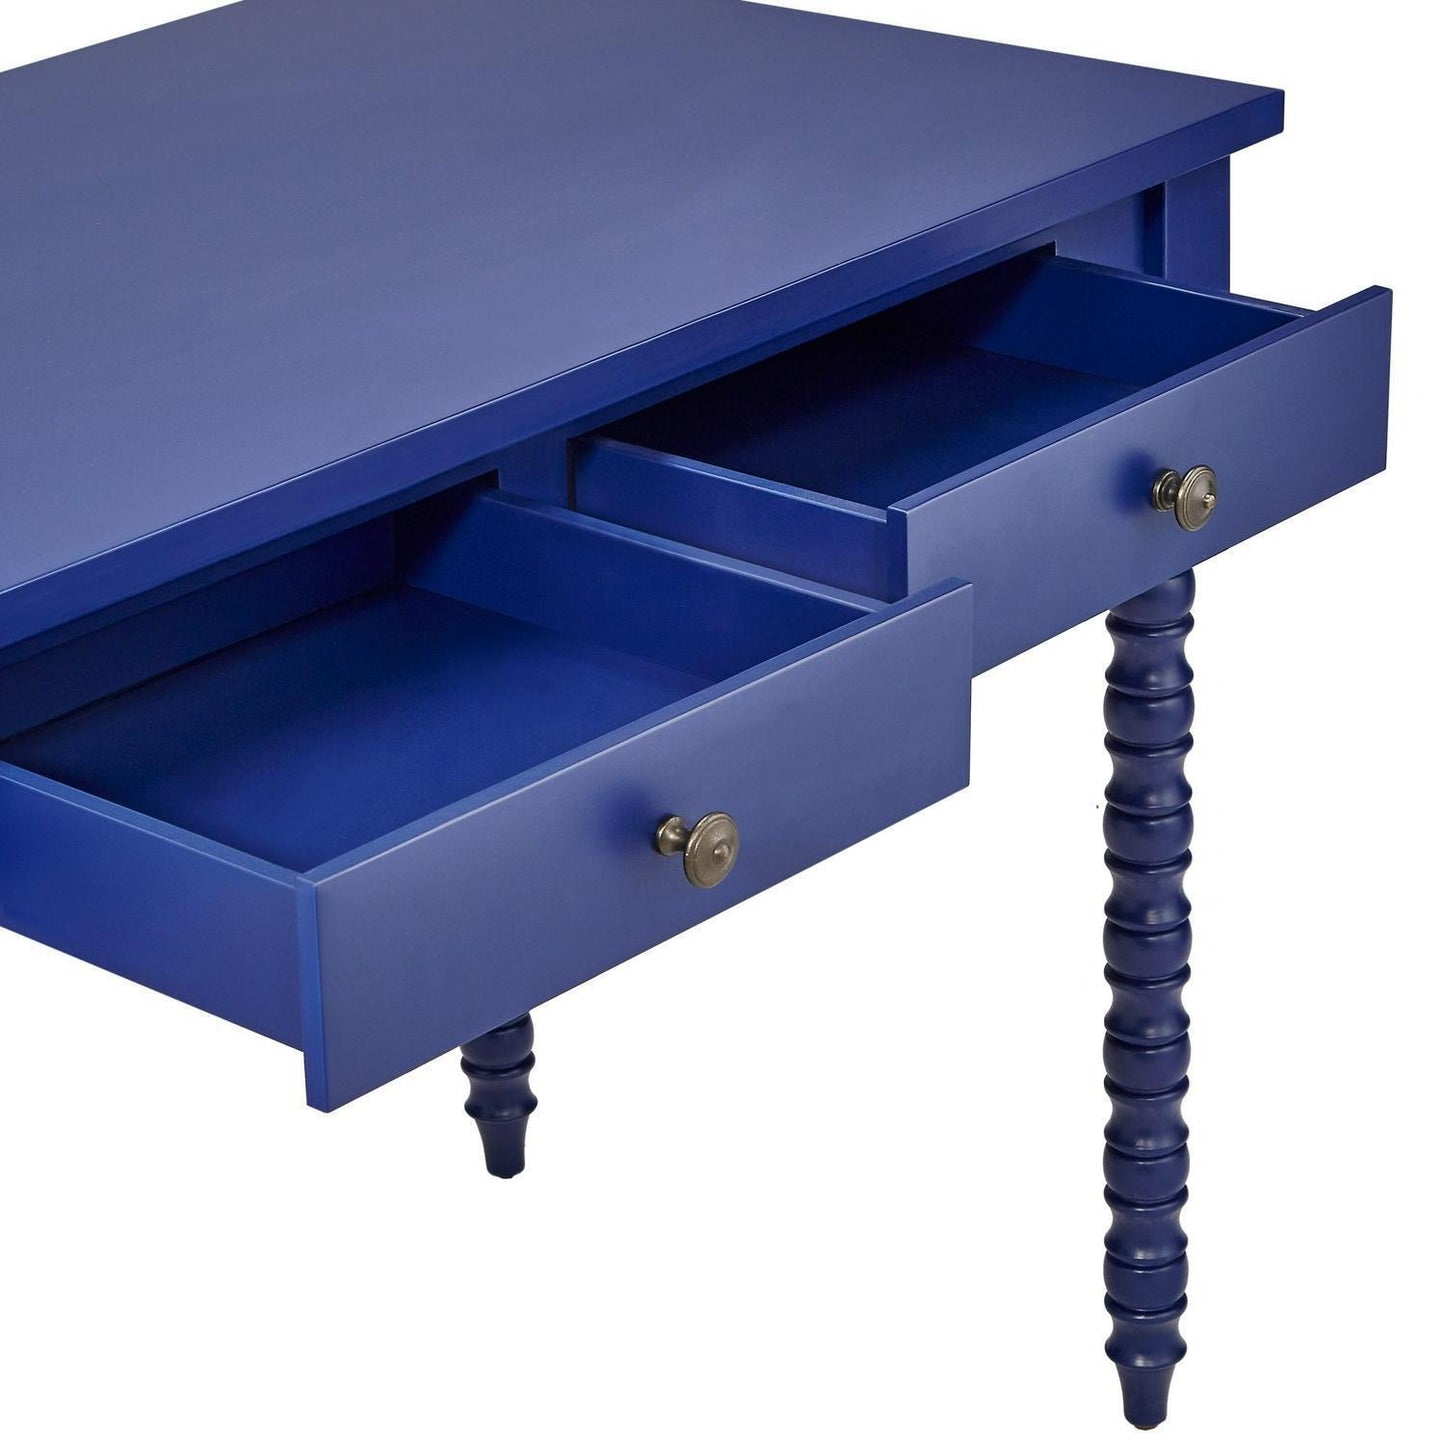 2 Drawer Minimalistic Office Desk Table with Helix Legs in Indigo Blue Finish